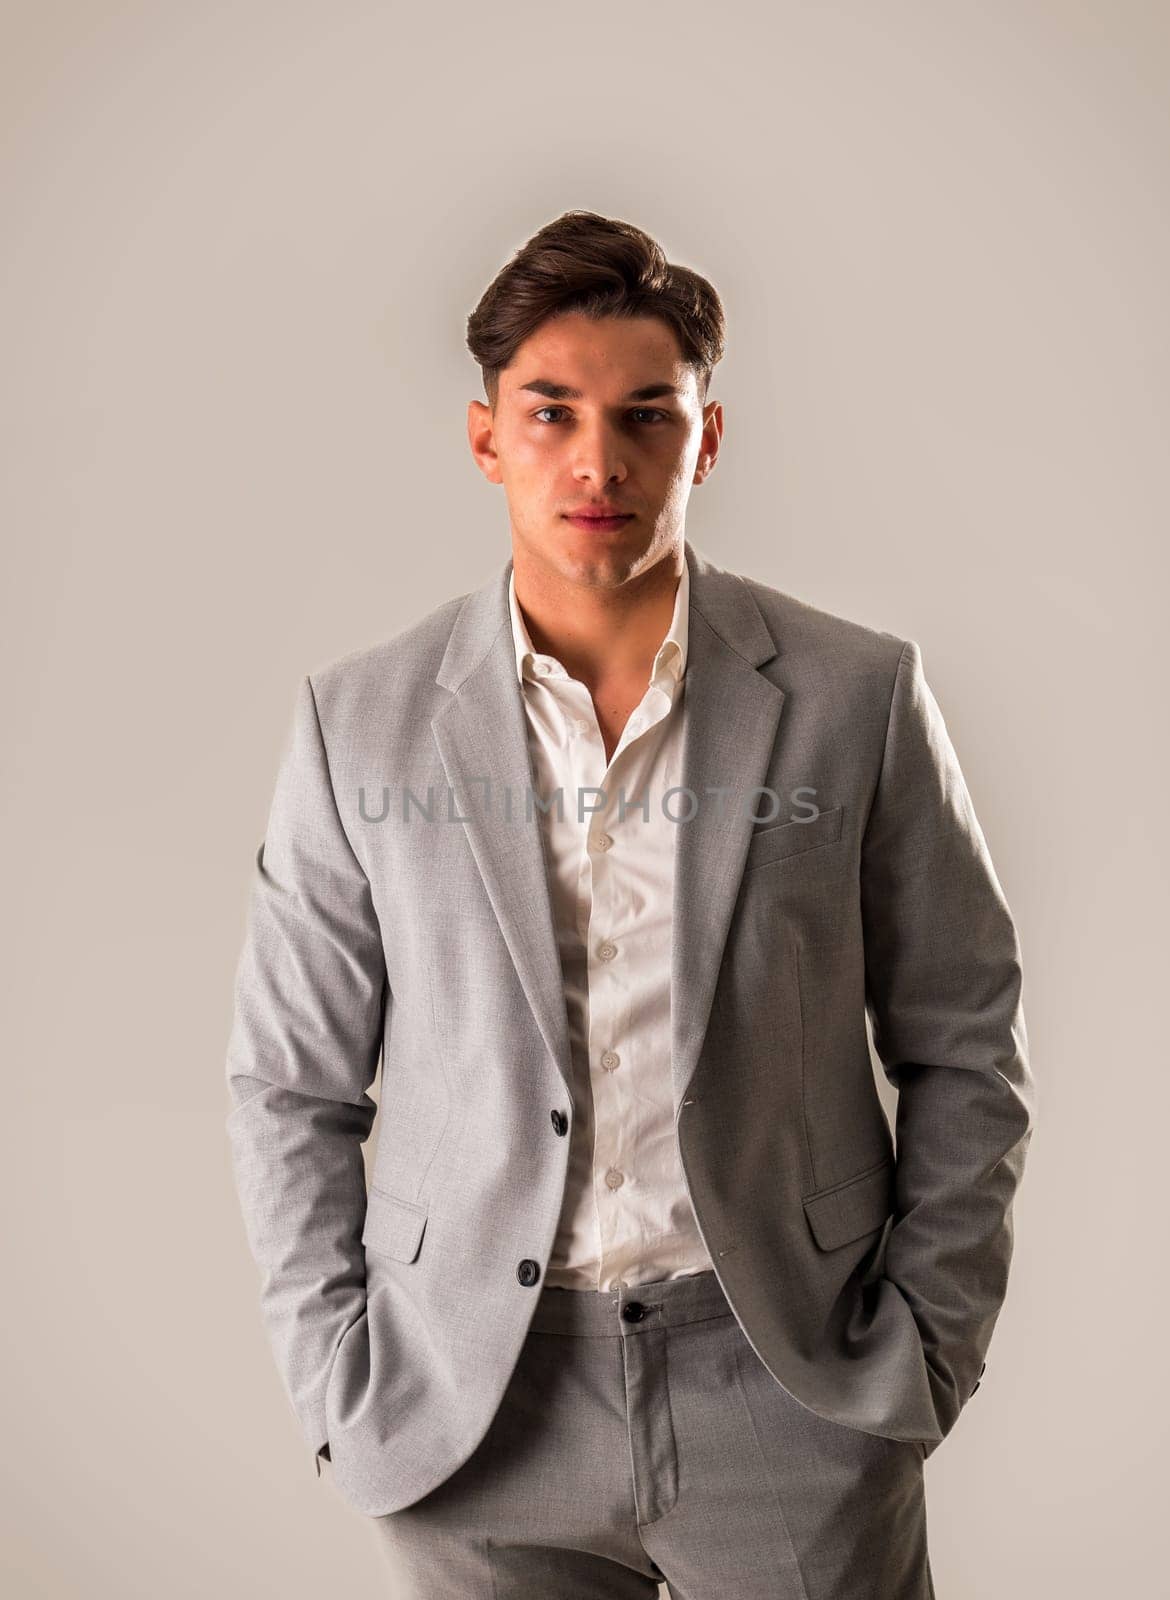 Handsome elegant young man with business suit, by artofphoto